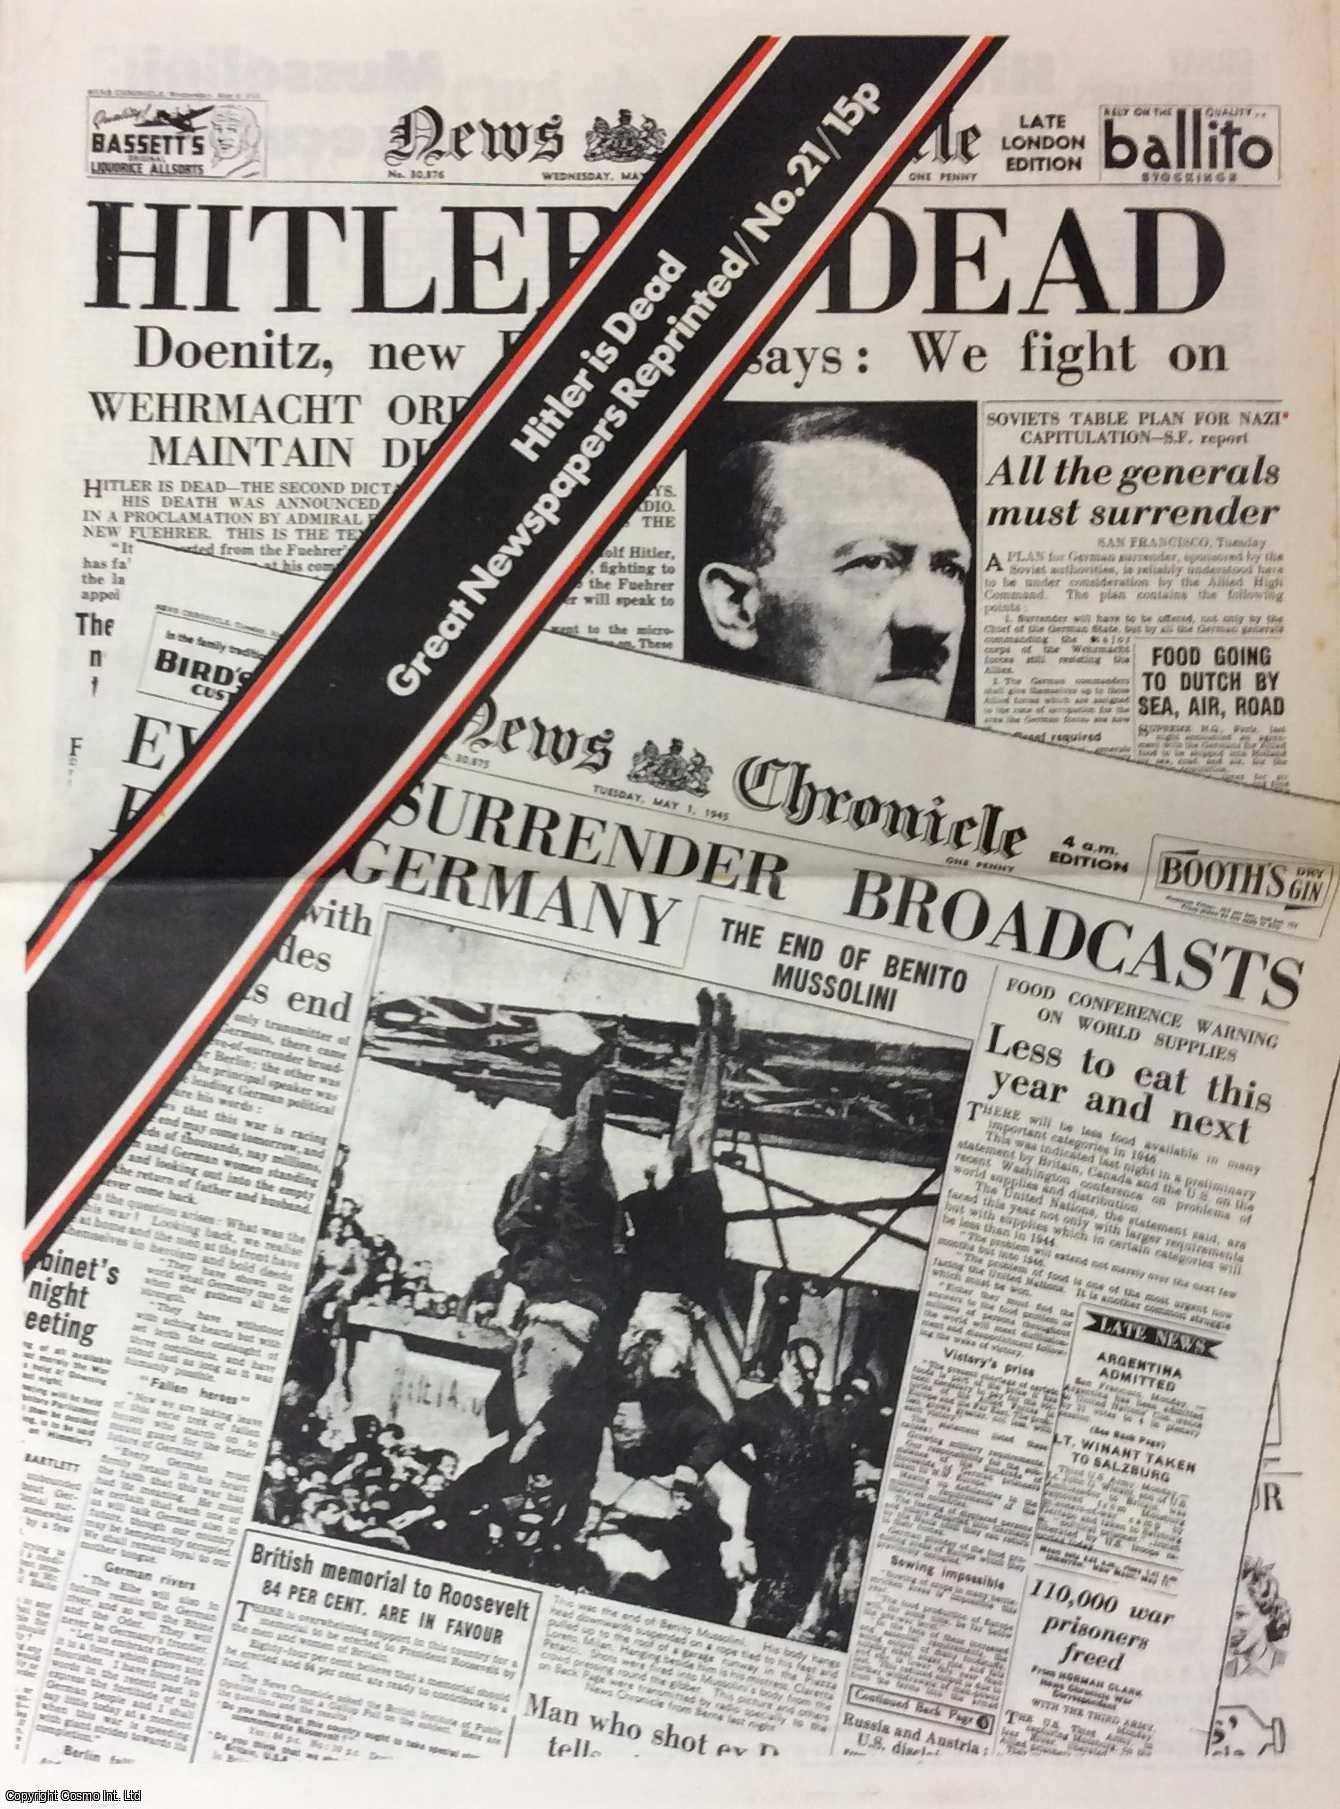 --- - Hitler is Dead. News Chronicle. Wednesday, May 2nd, 1945. Great Newspapers Reprinted, Number 21.